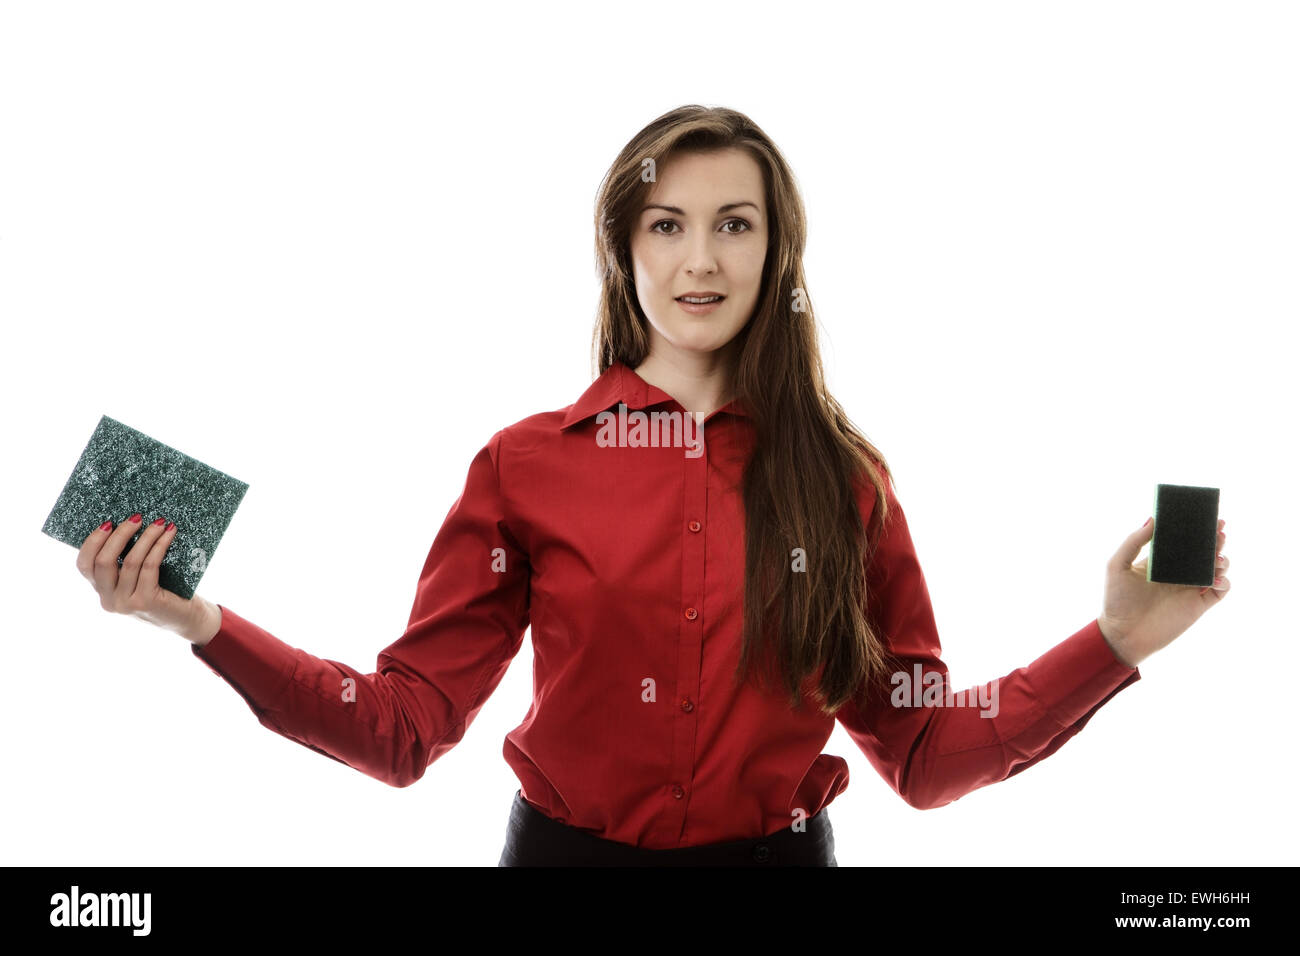 woman with outstretched hand holding two cleaning sponges Stock Photo